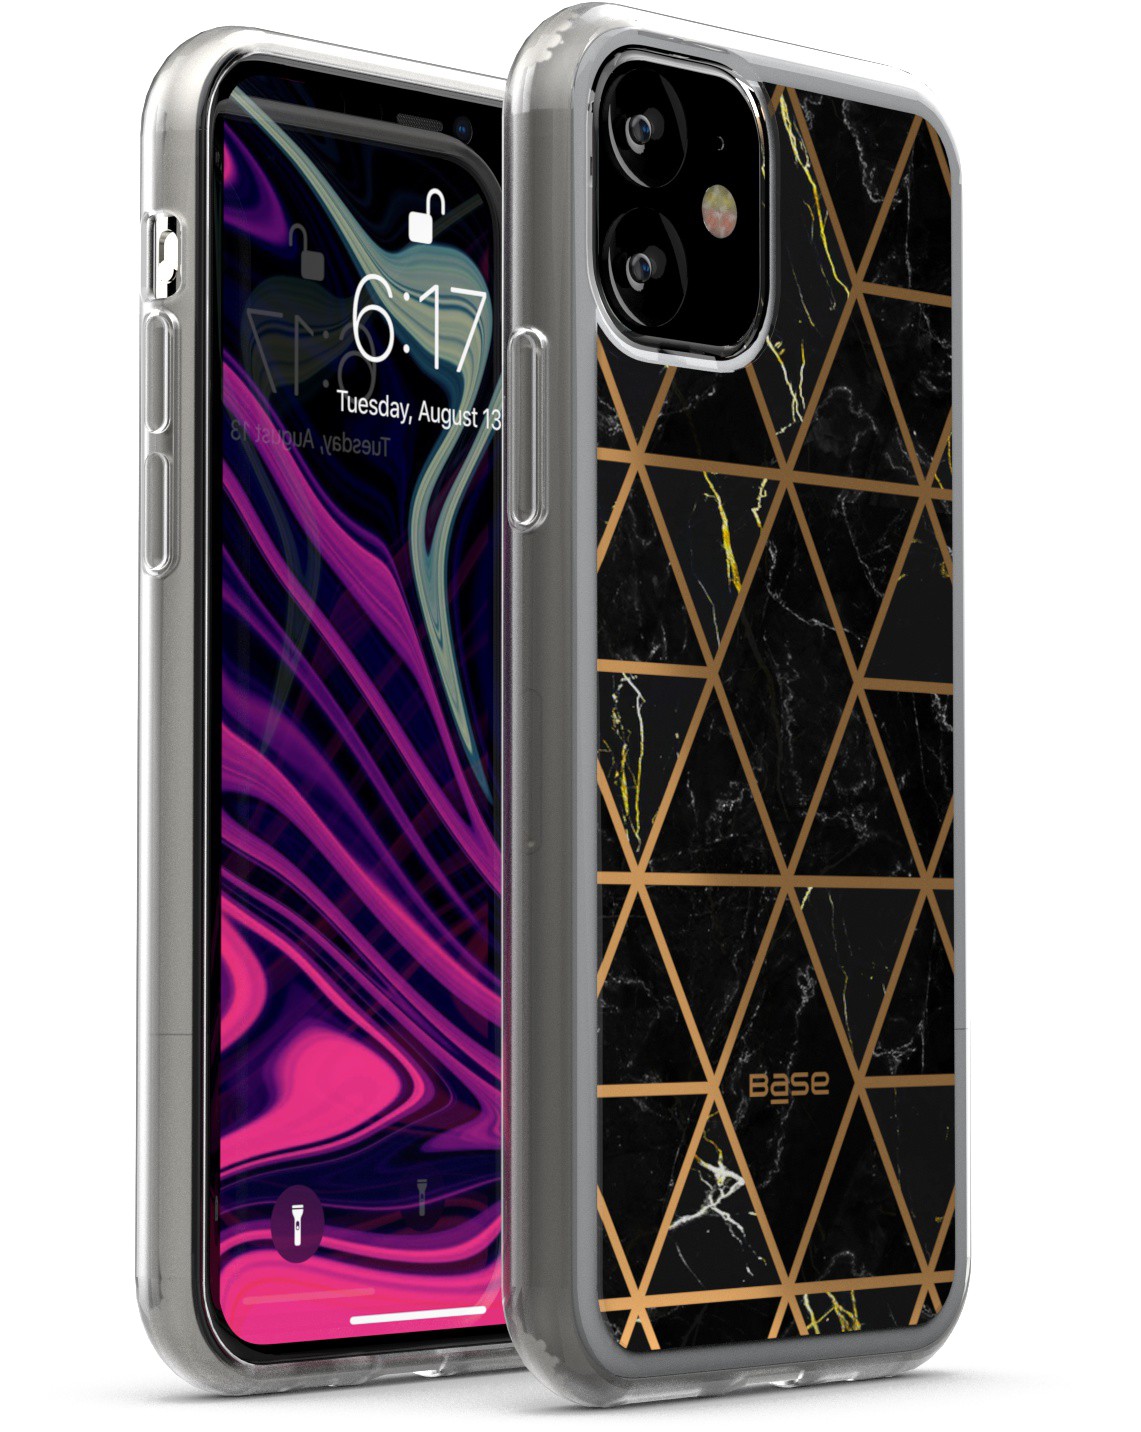 marbled black protective case with gold geometric design for iPhone 11 cell phones